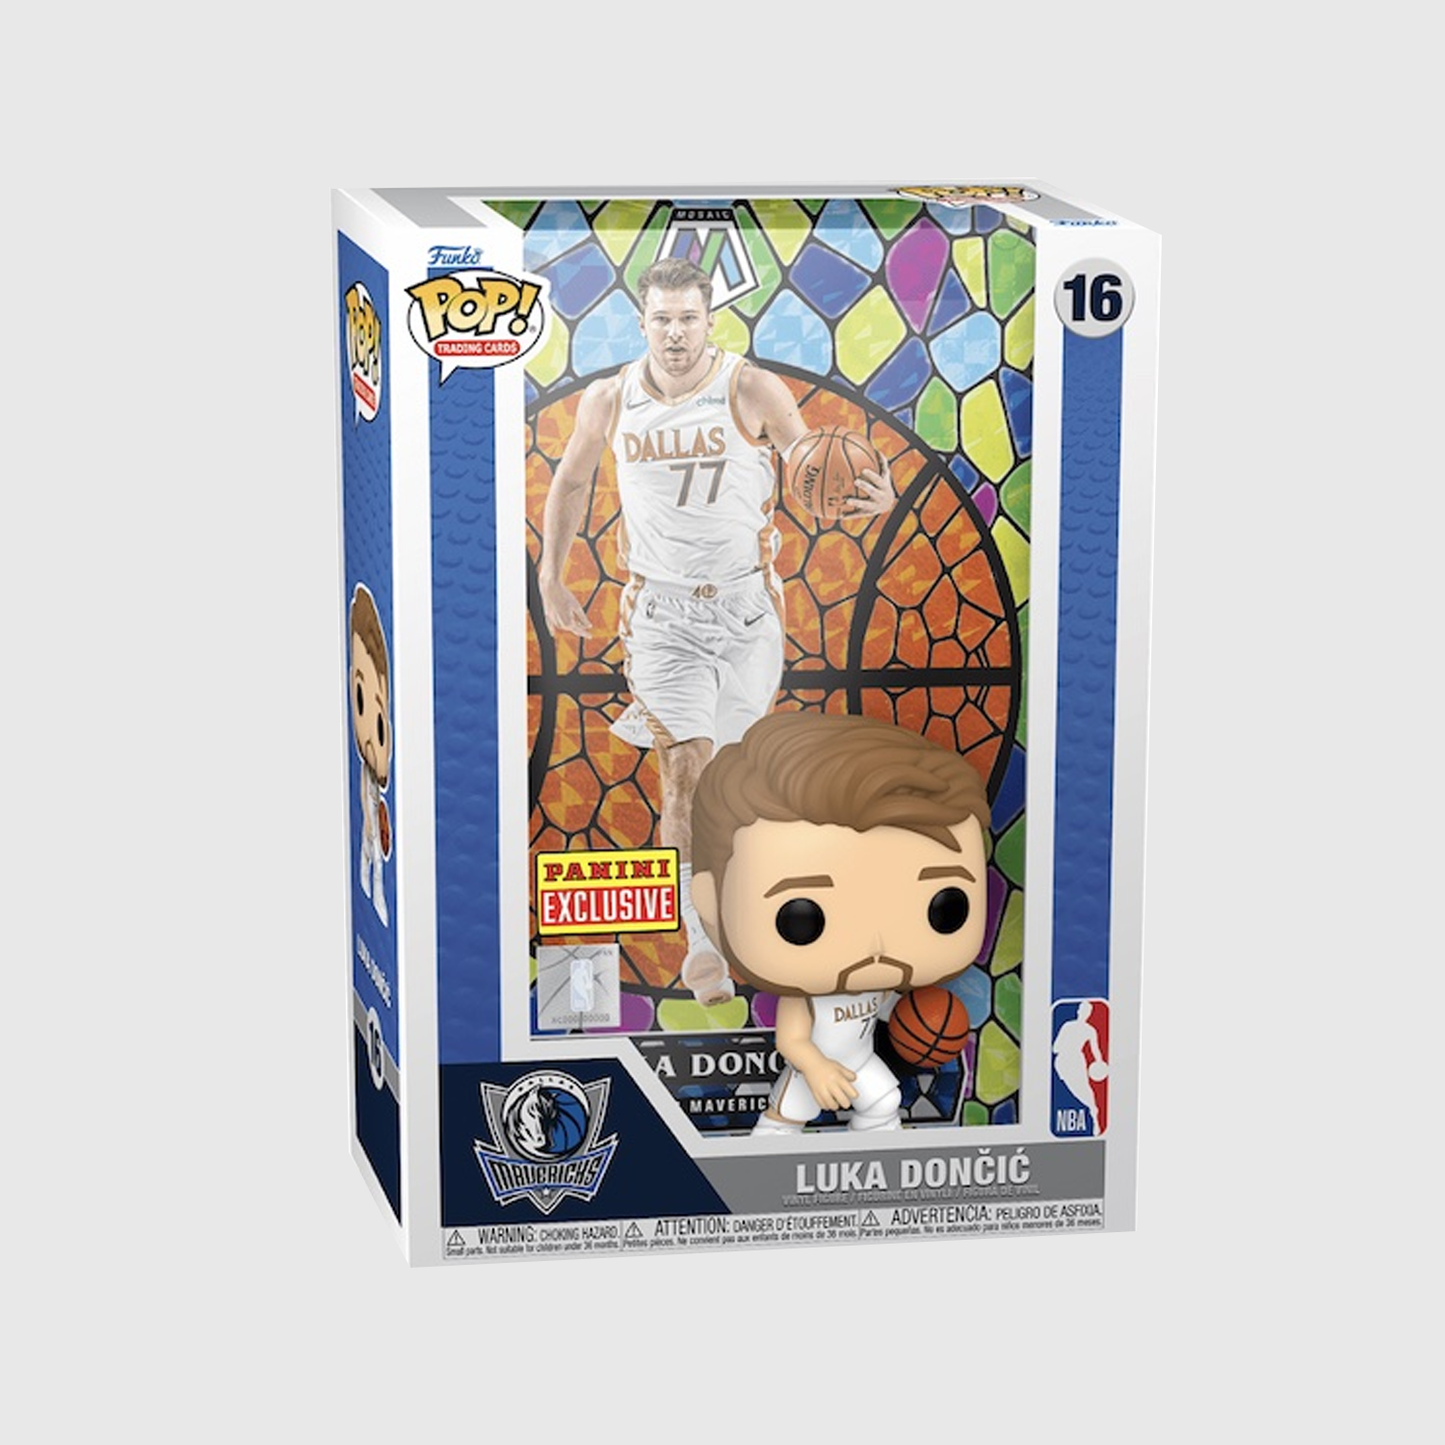 (PRE-ORDER) Funko POP! Trading Cards: Luka Doncic - Mosaic Prism #16 (Panini Exclusive)